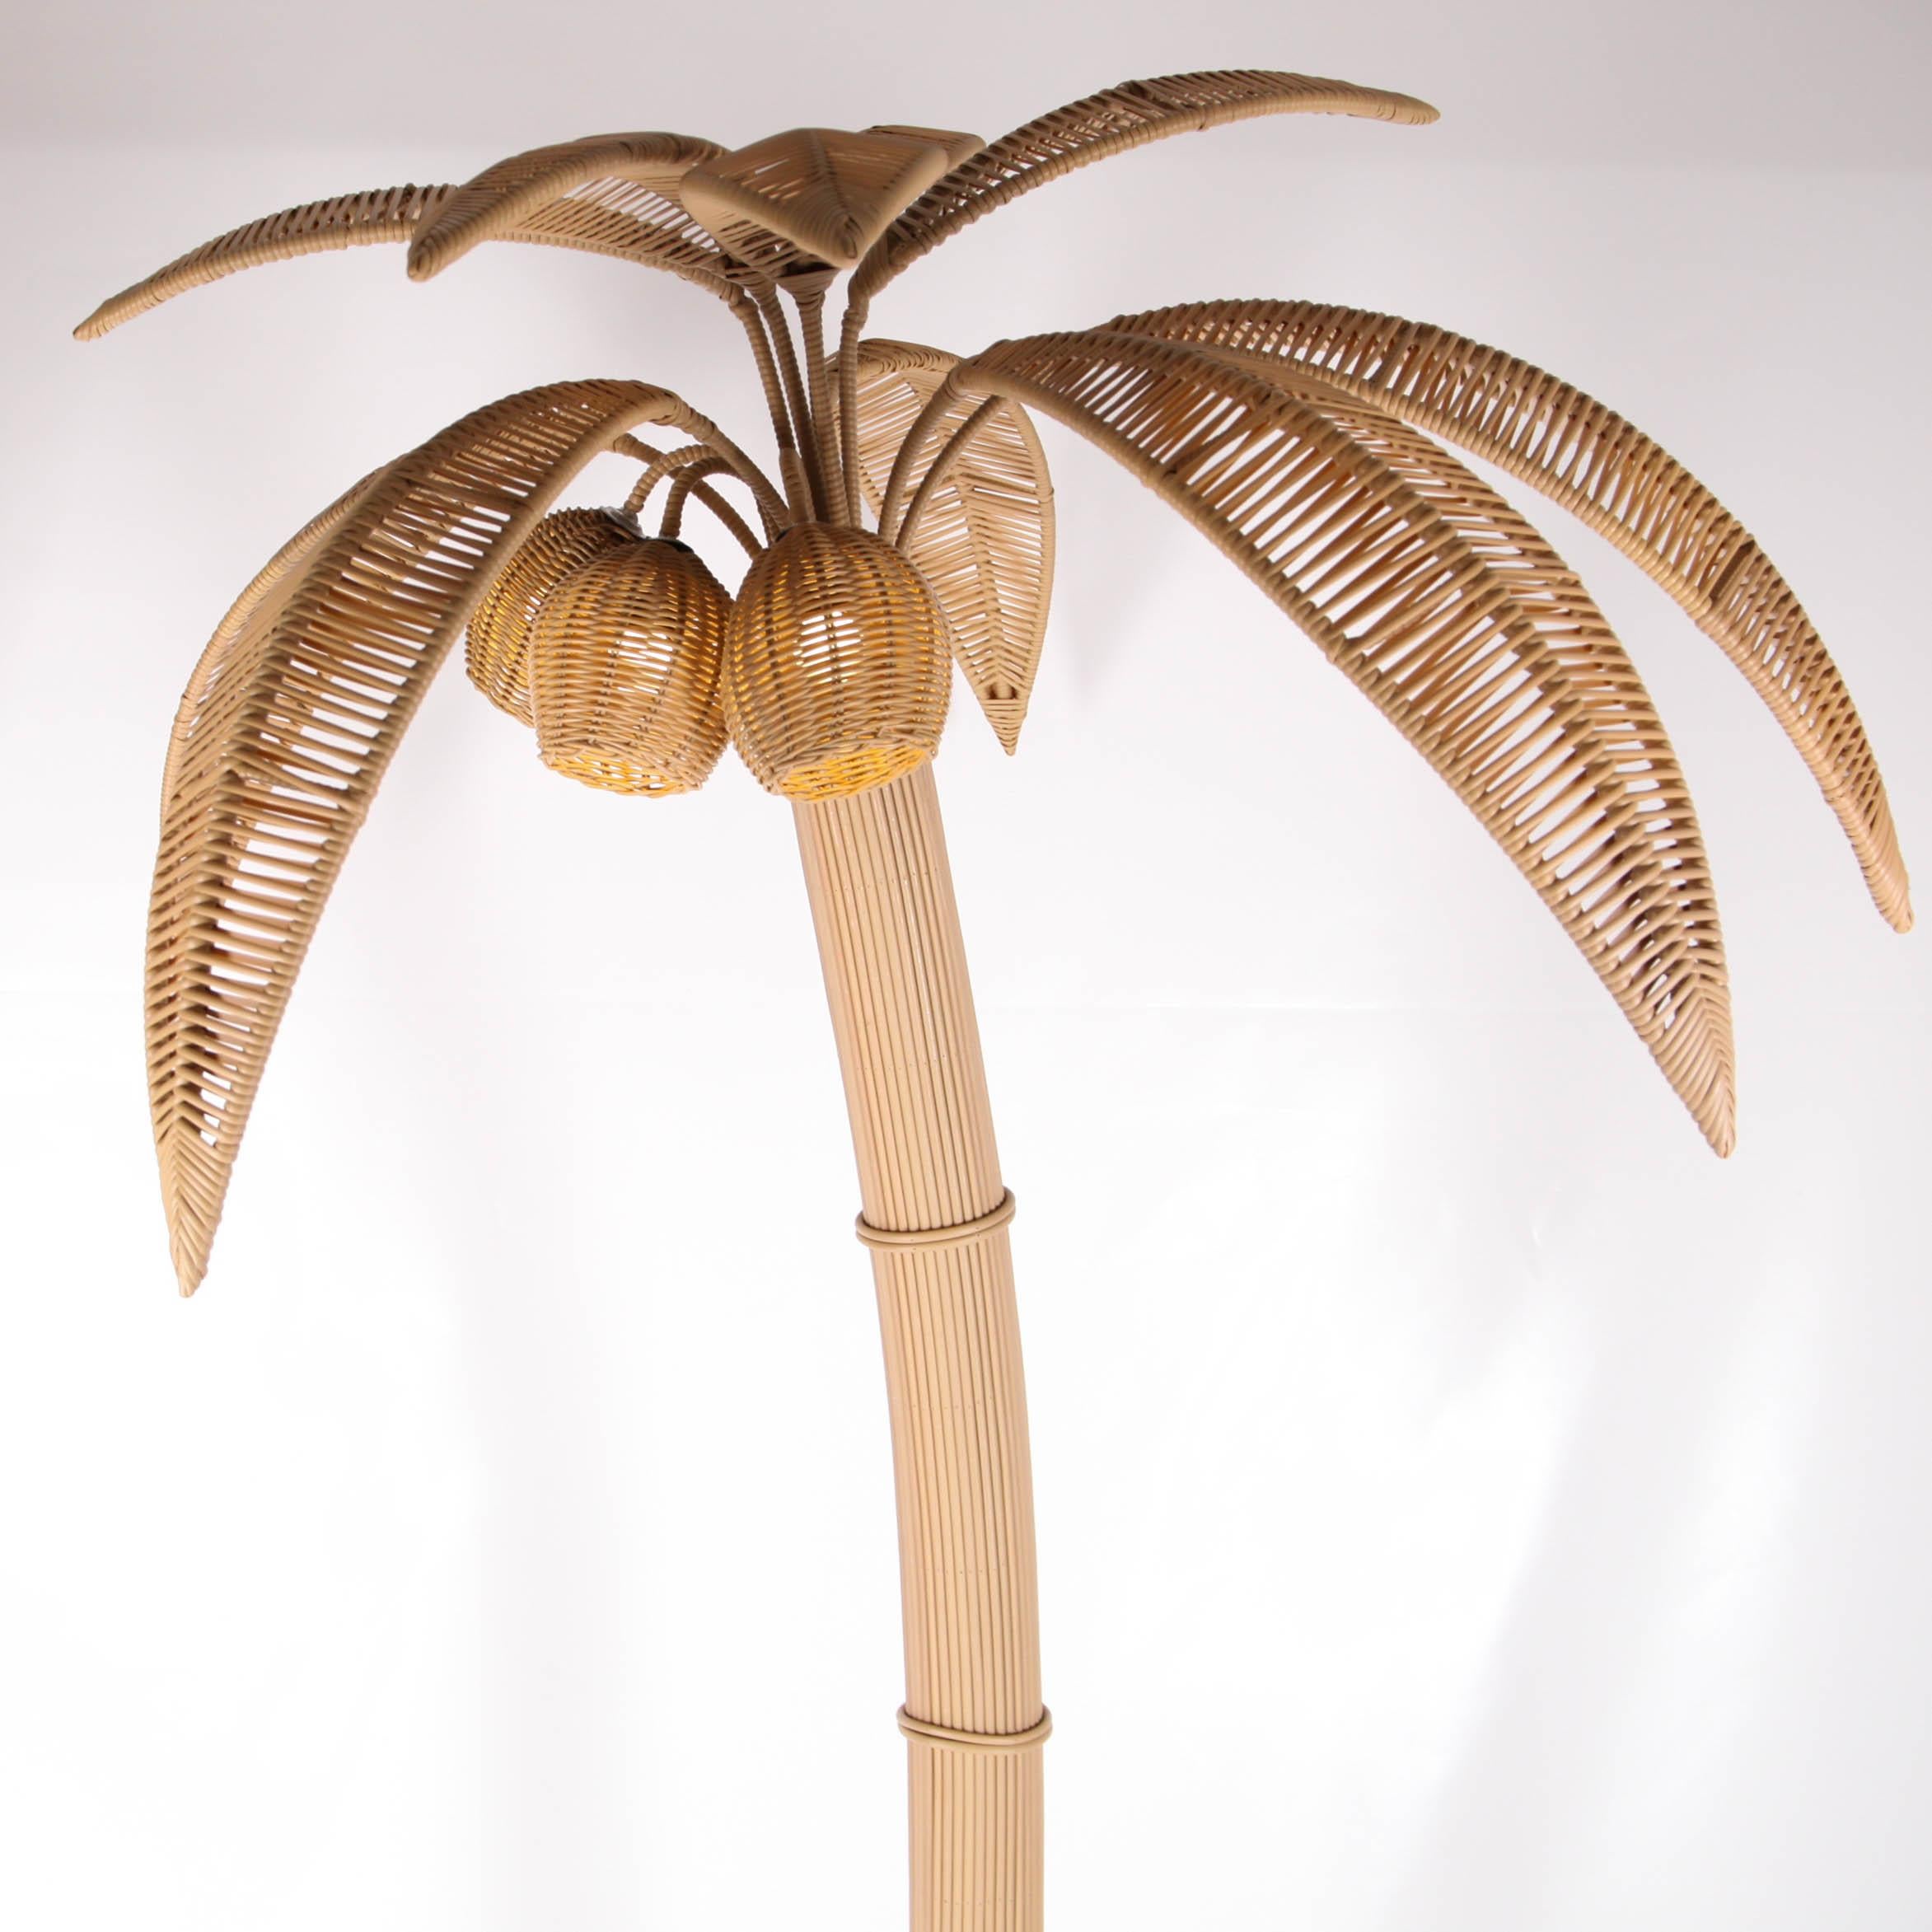 Handmade synthetic rattan coconut tree / palm tree floorlamp for outdoor and/or indoor use. You can easily transform your garden into an exotic vibe. It comes with 3 lights (one in each coconut). The base is heavy. It can stand still in normal windy